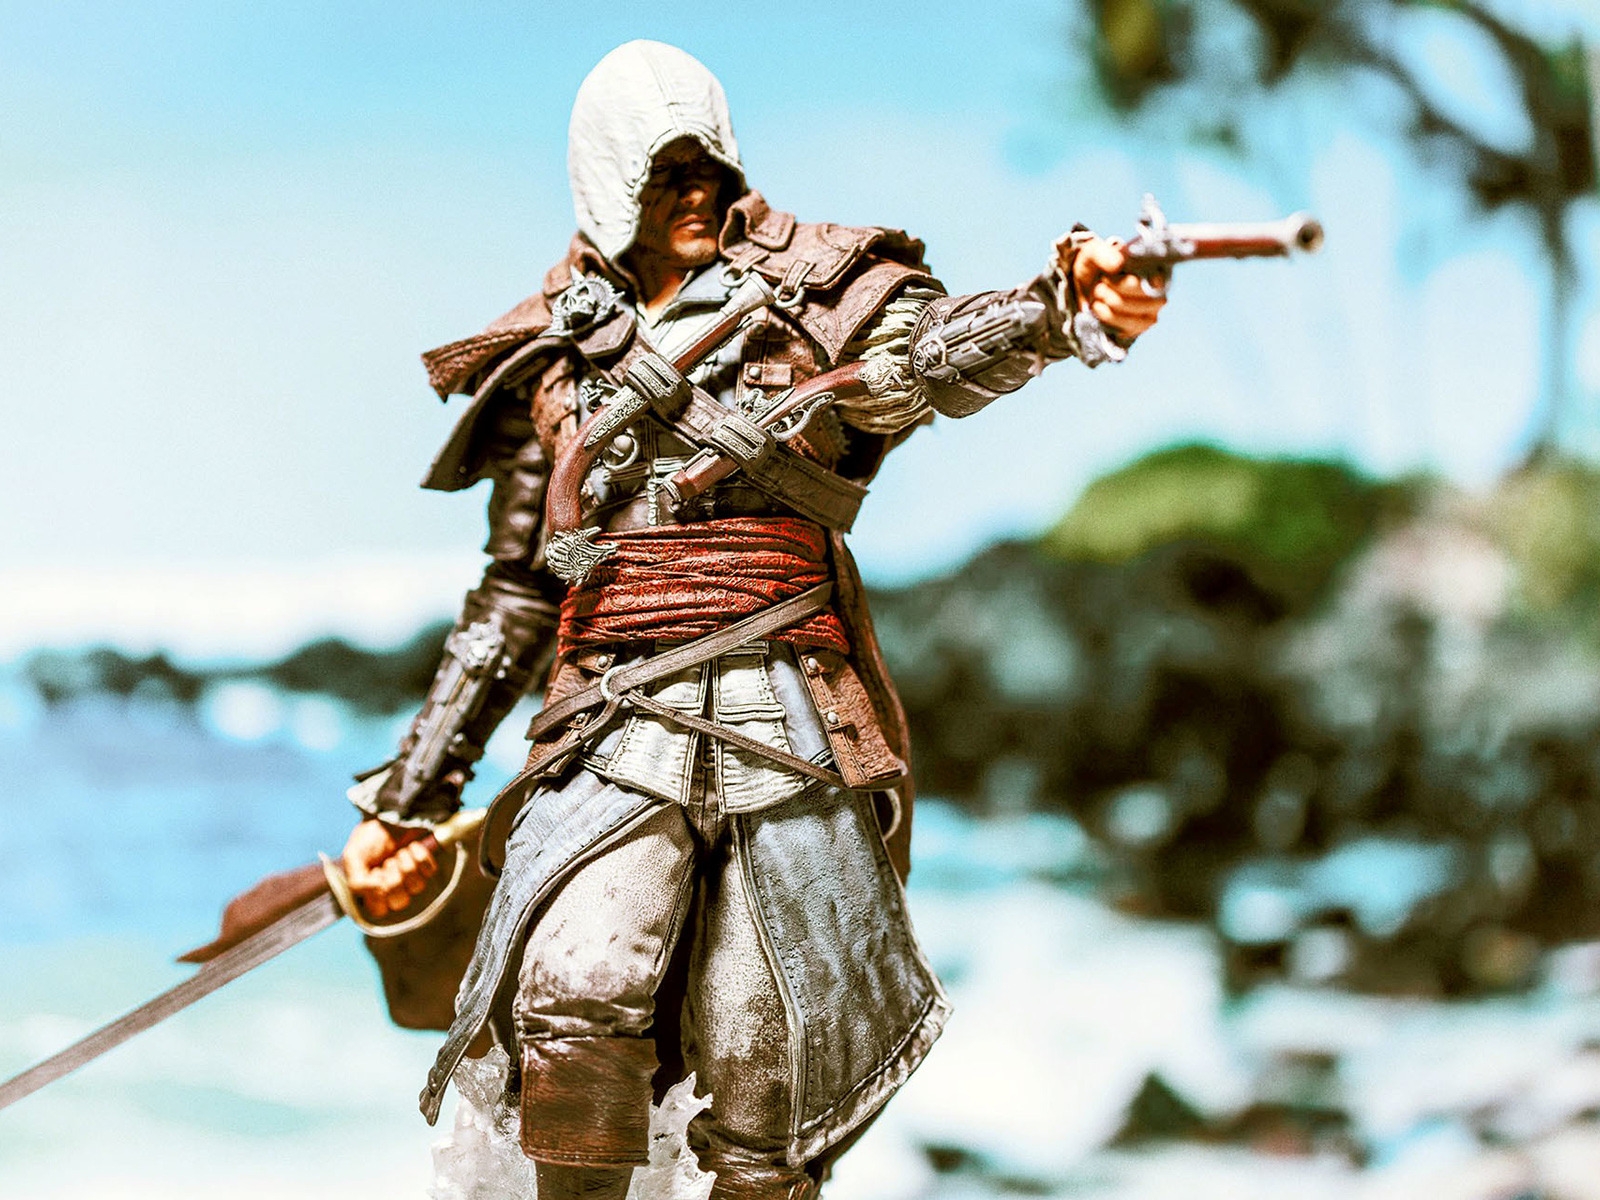 Assassin Creed Black Flag Character for 1600 x 1200 resolution